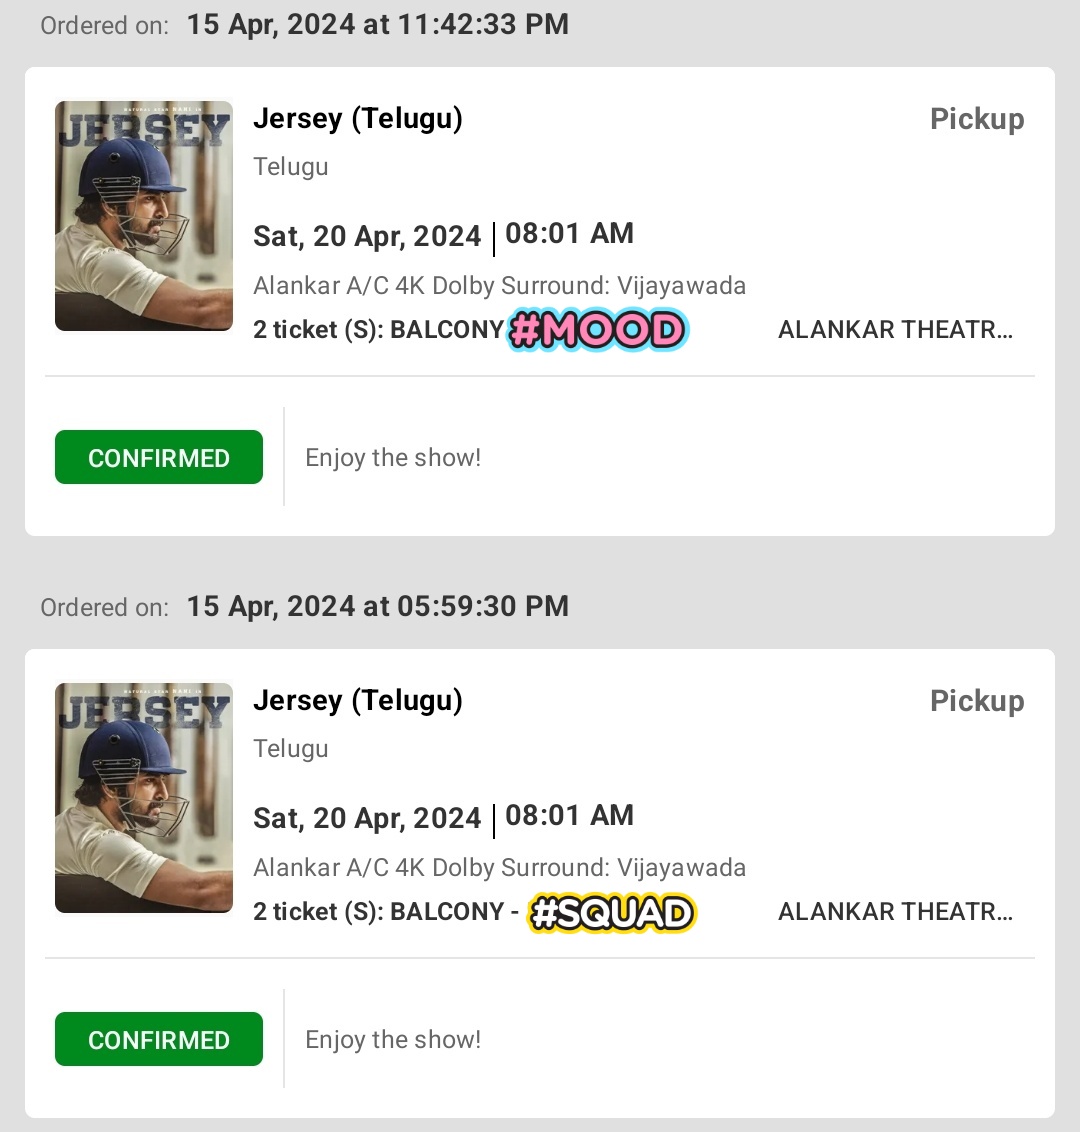 #JerseySpecialShows Booked 😍🤩
This will be my COUNT 4 in Theatre 🥰
The film won 2 National Awards ❤️

#Nani #Jersey #Anirudh #GowthamTinnanuri